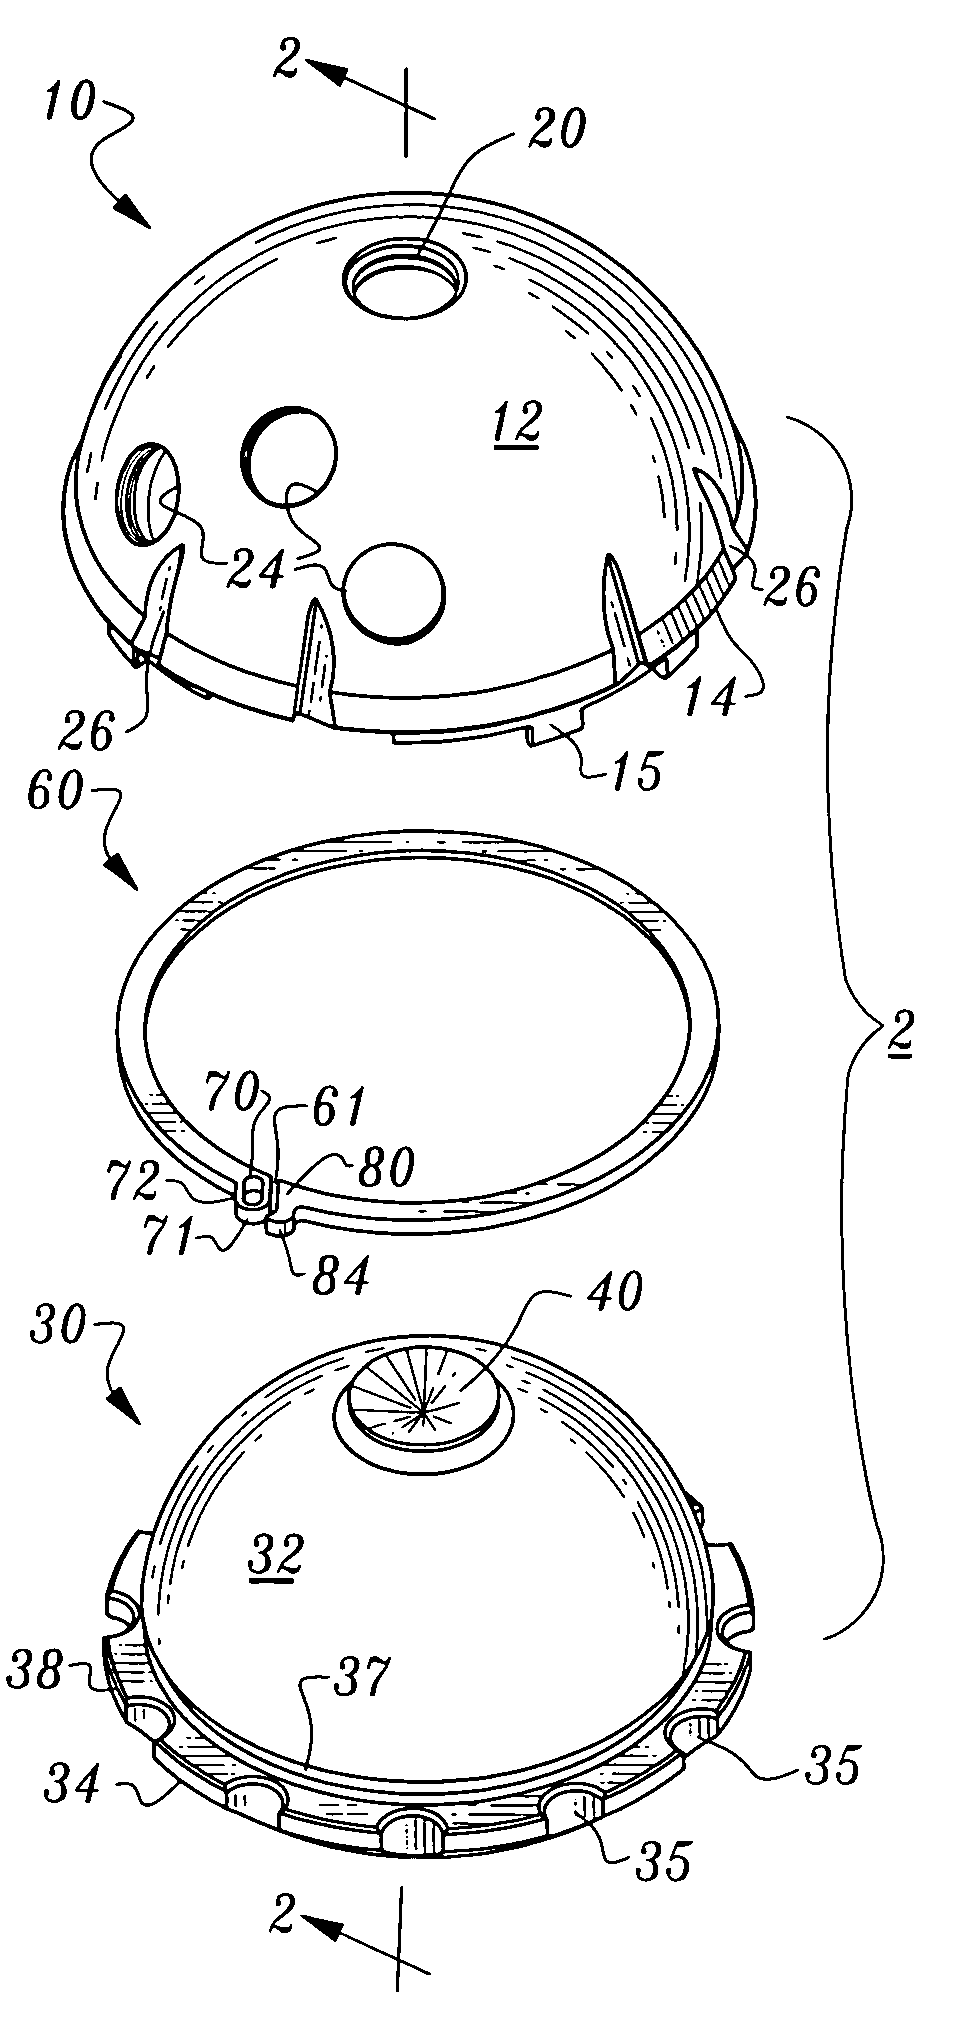 Locking ring for liner of acetabular cup